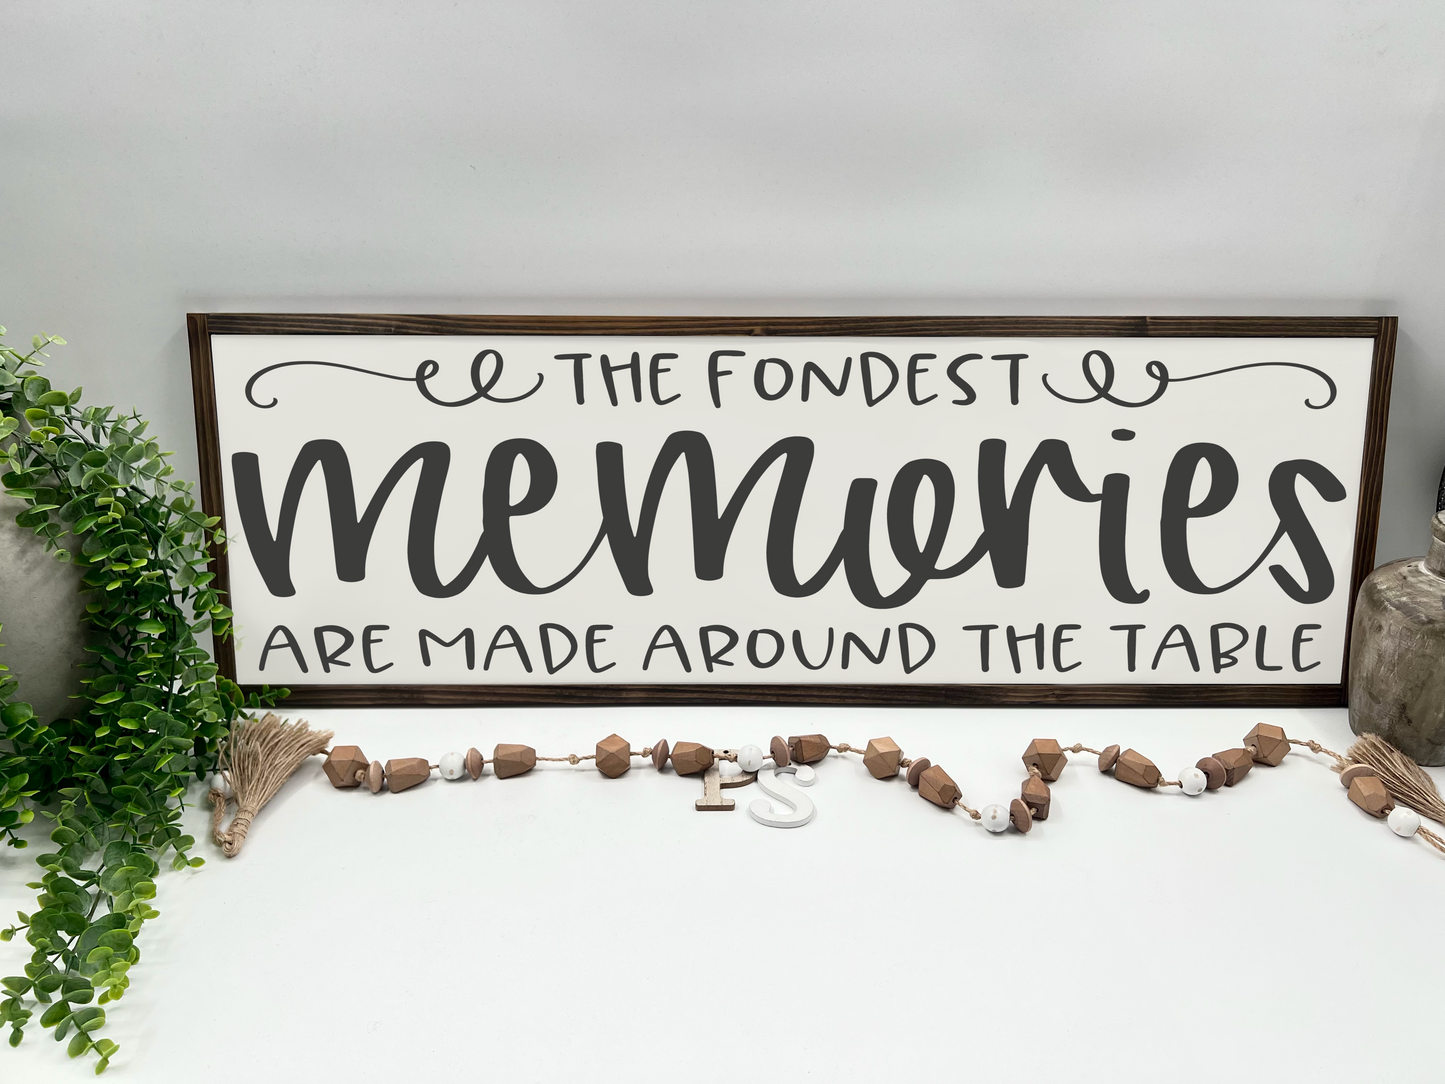 The Fondest Memories Are Made Around The Table - White/Thick/Kona - Wood Sign